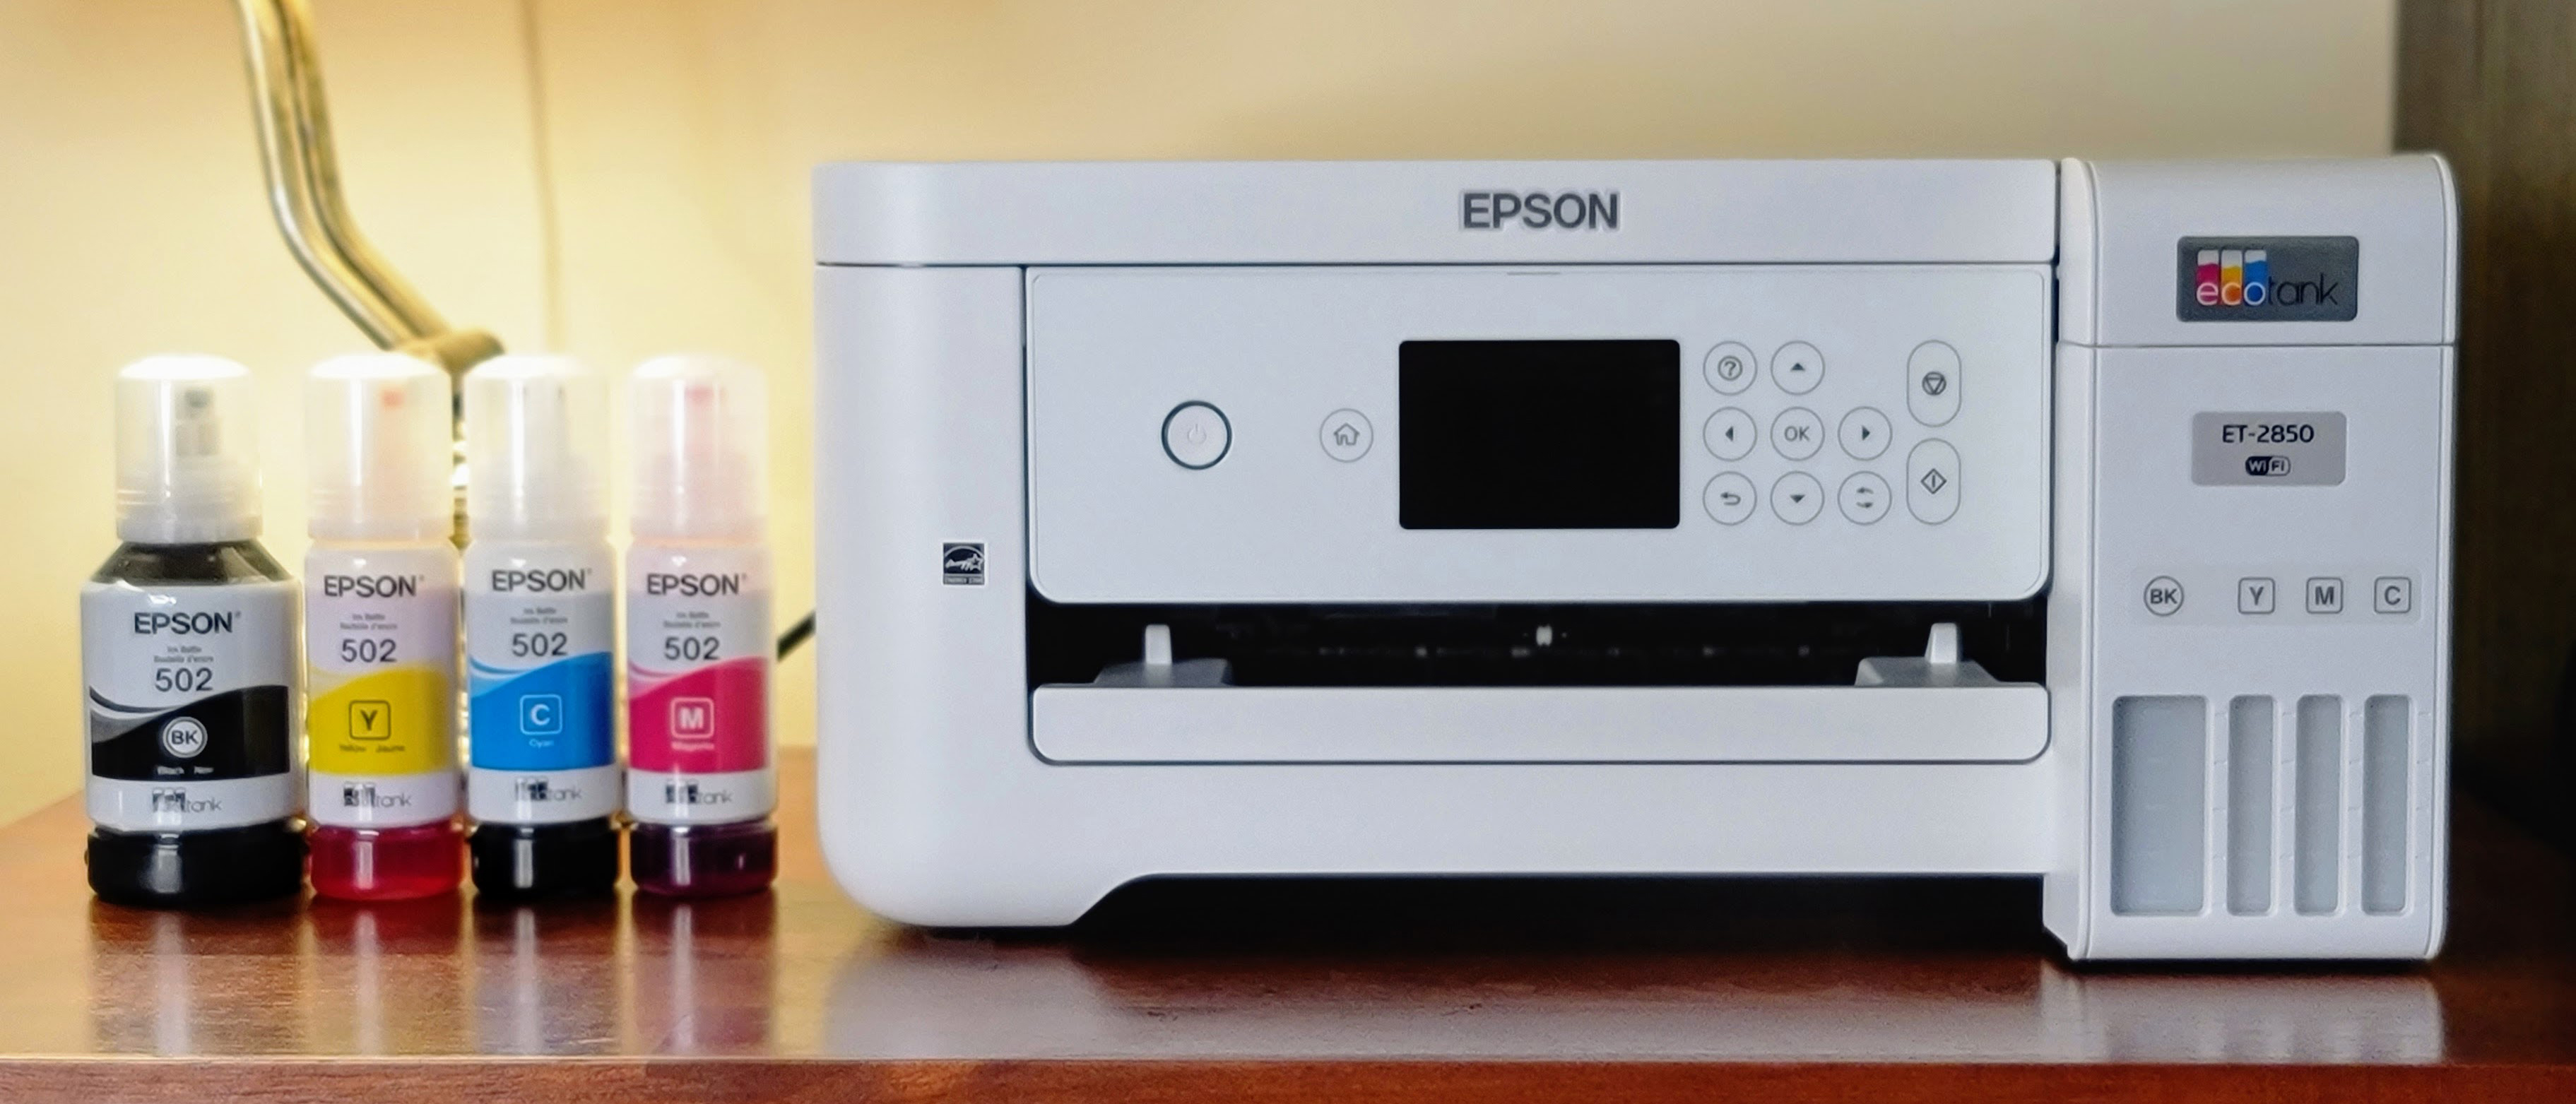 Epson EcoTank ET-2850 All-in-One Printer review